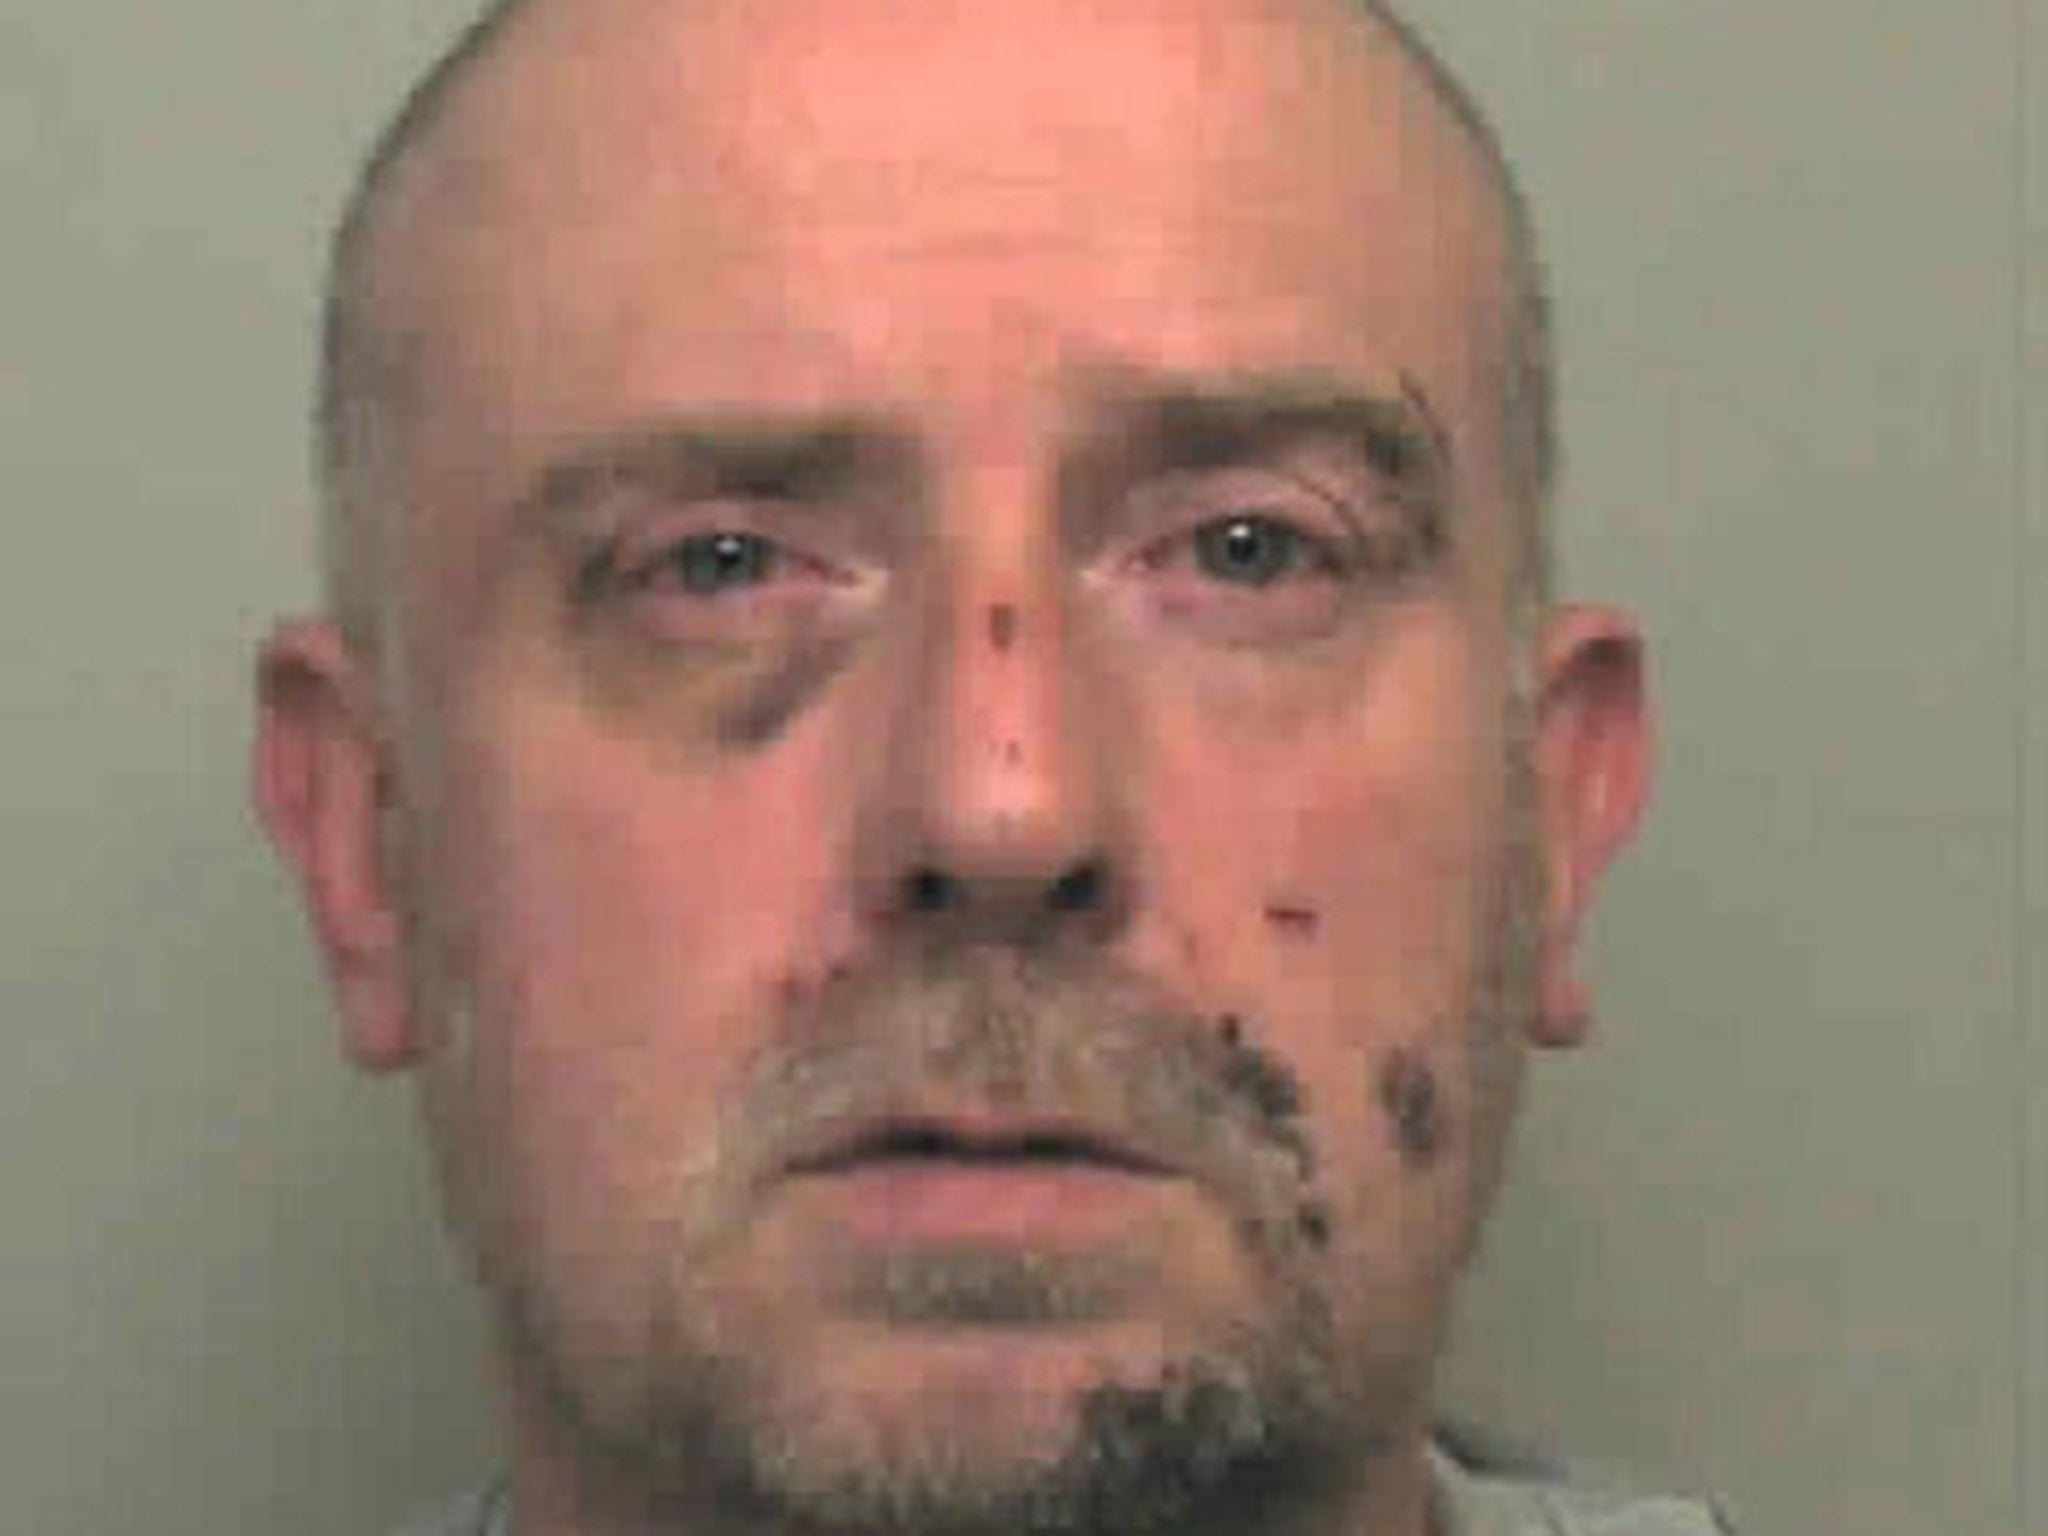 Adrian Goldsmith has sentenced to life in prison with a minimum of 15 years in jail